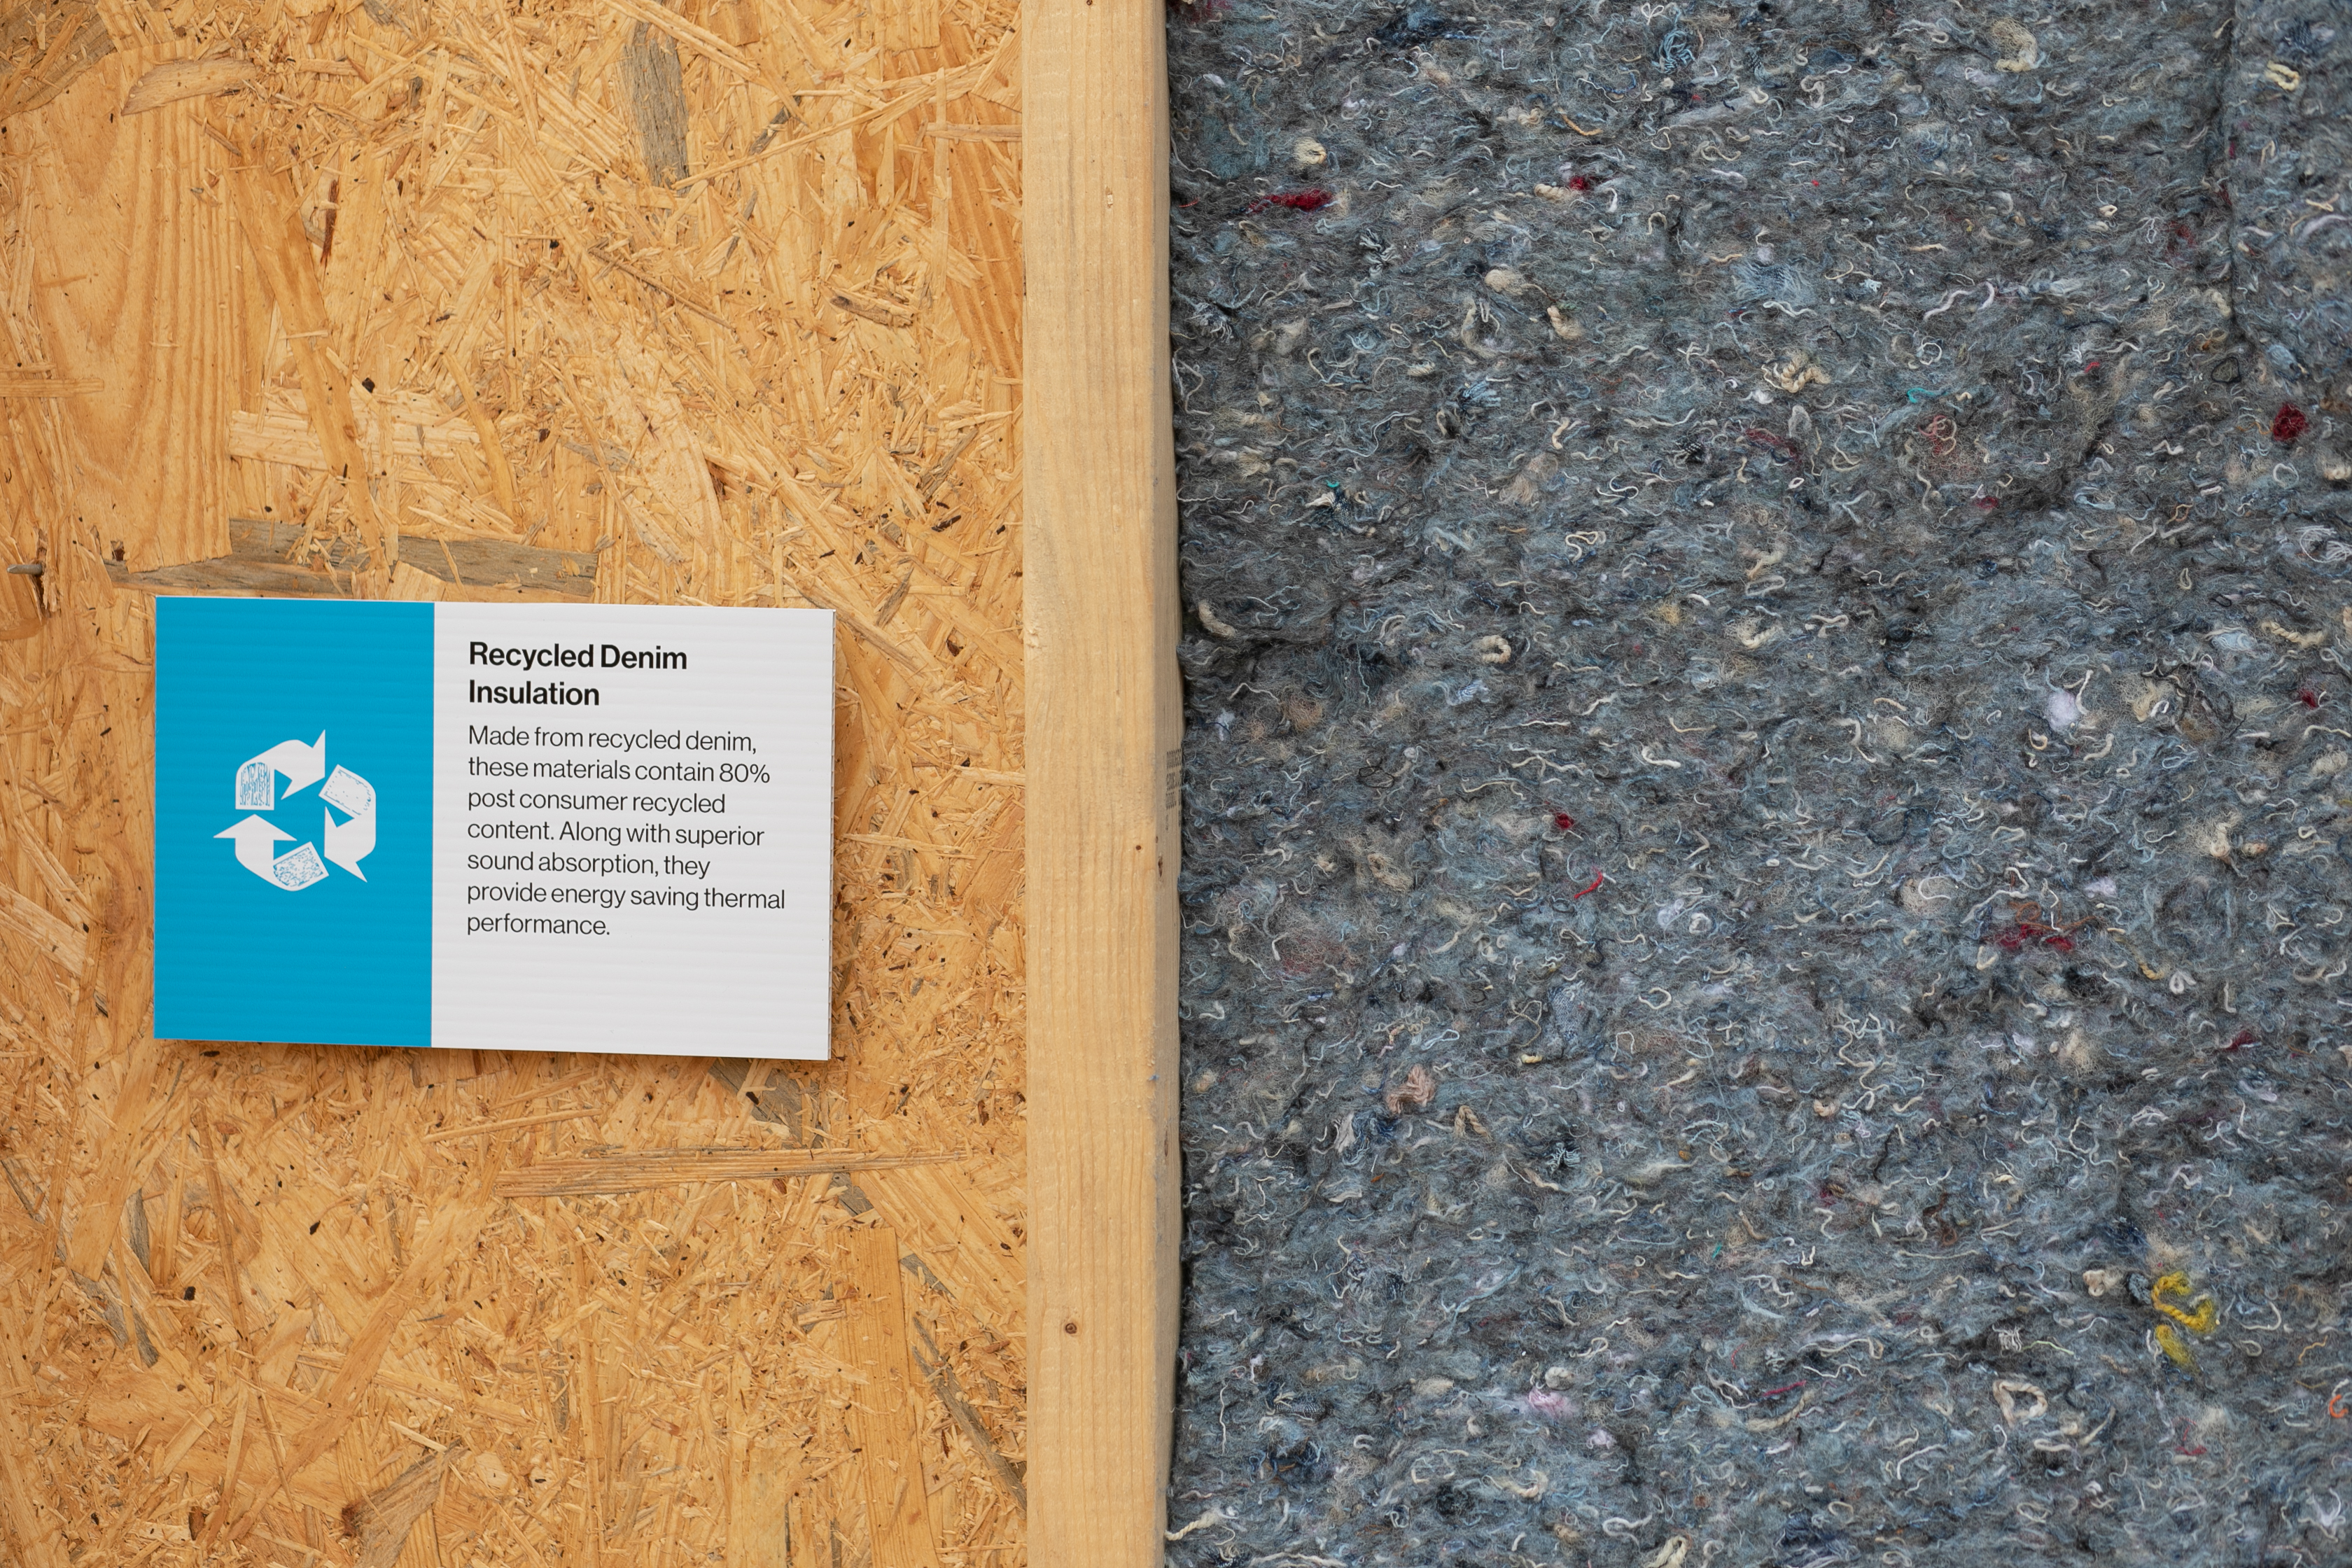 Habitat uses recycled denim insulation in their green homes